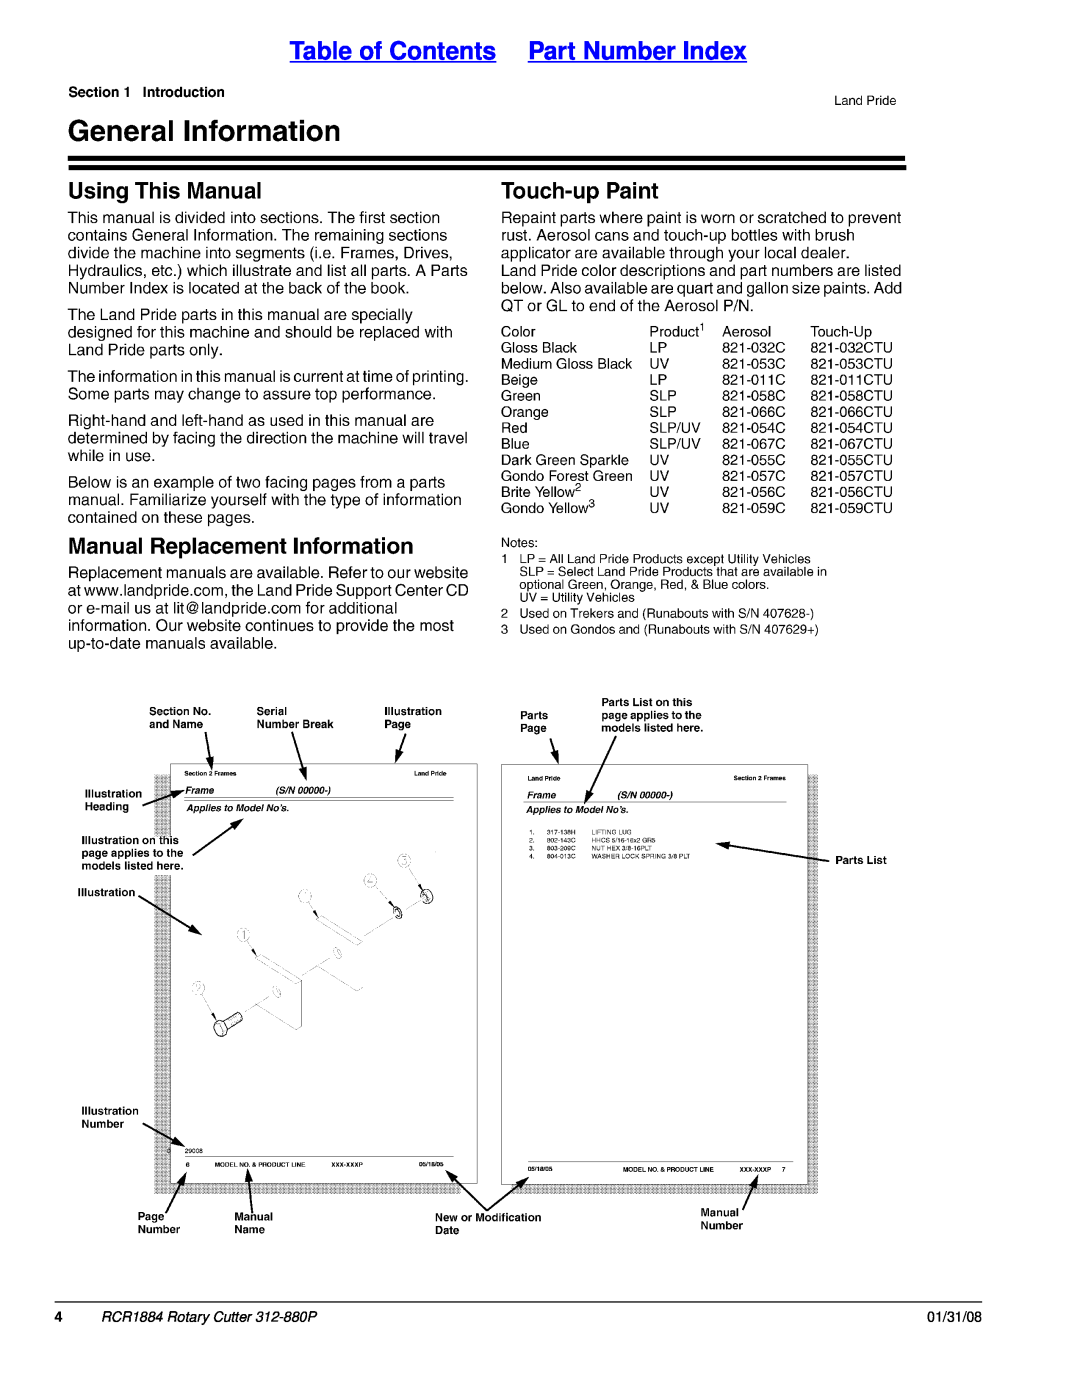 Land Pride manual Table of Contents Part Number Index, RCR1884 Rotary Cutter 312-880P, 01/31/08 